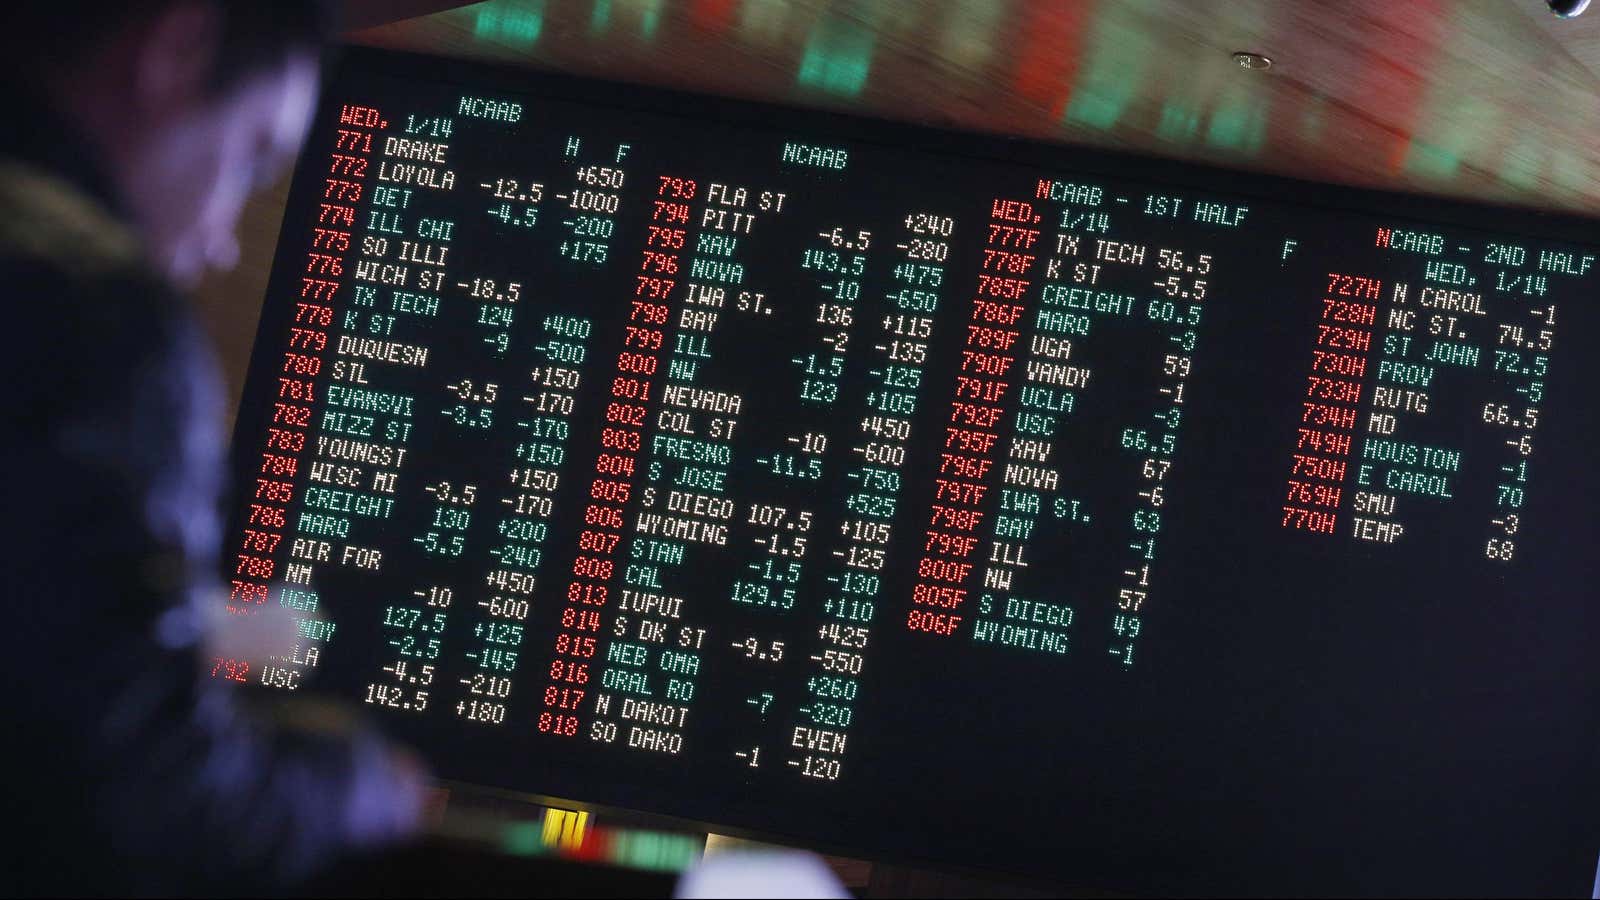 This is what legal betting looks like in the US.